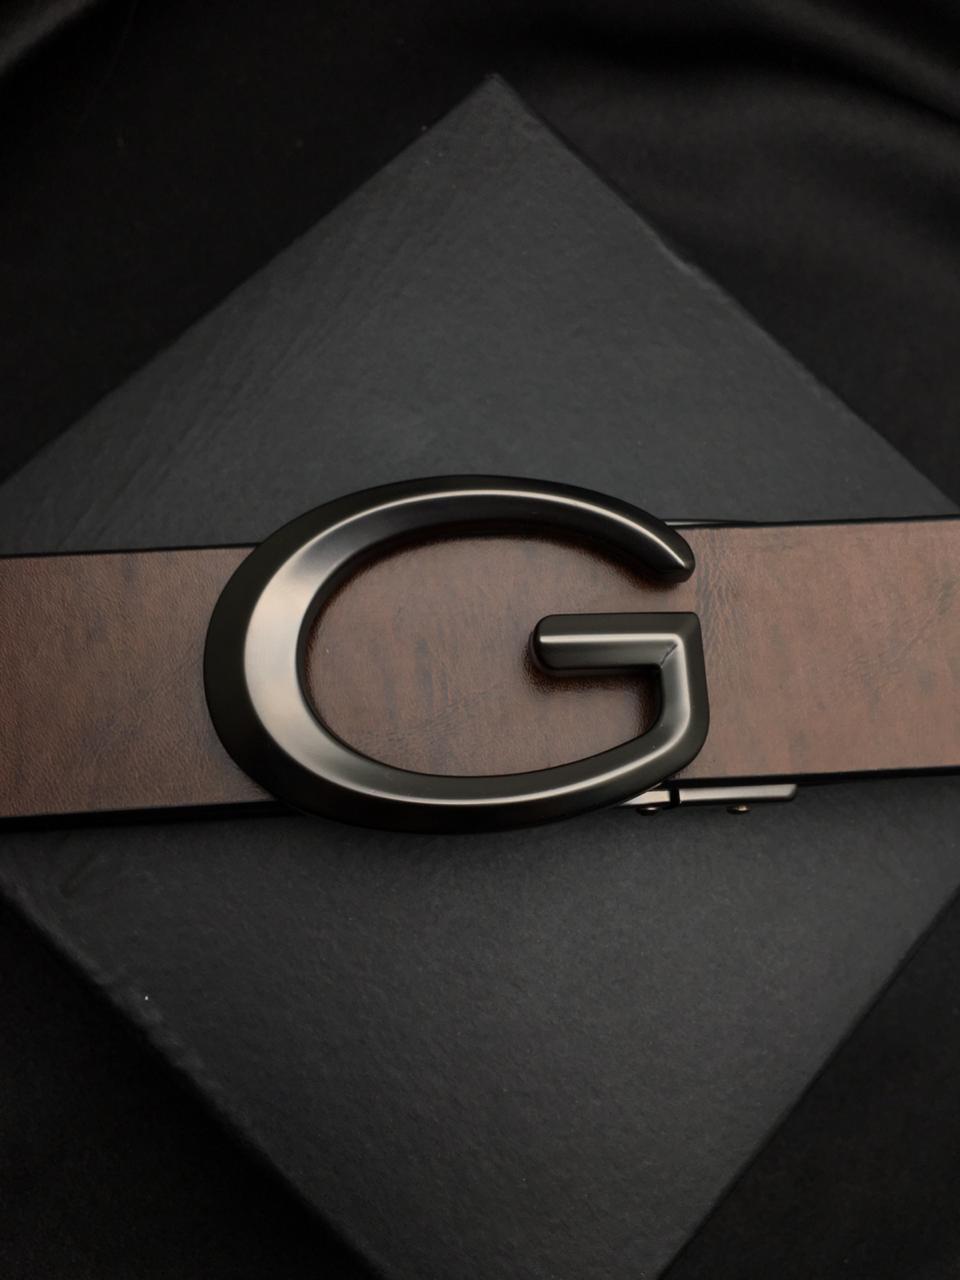 Classic G-Design Buckle High Quality Leather Belts For Men-Unique and Classy